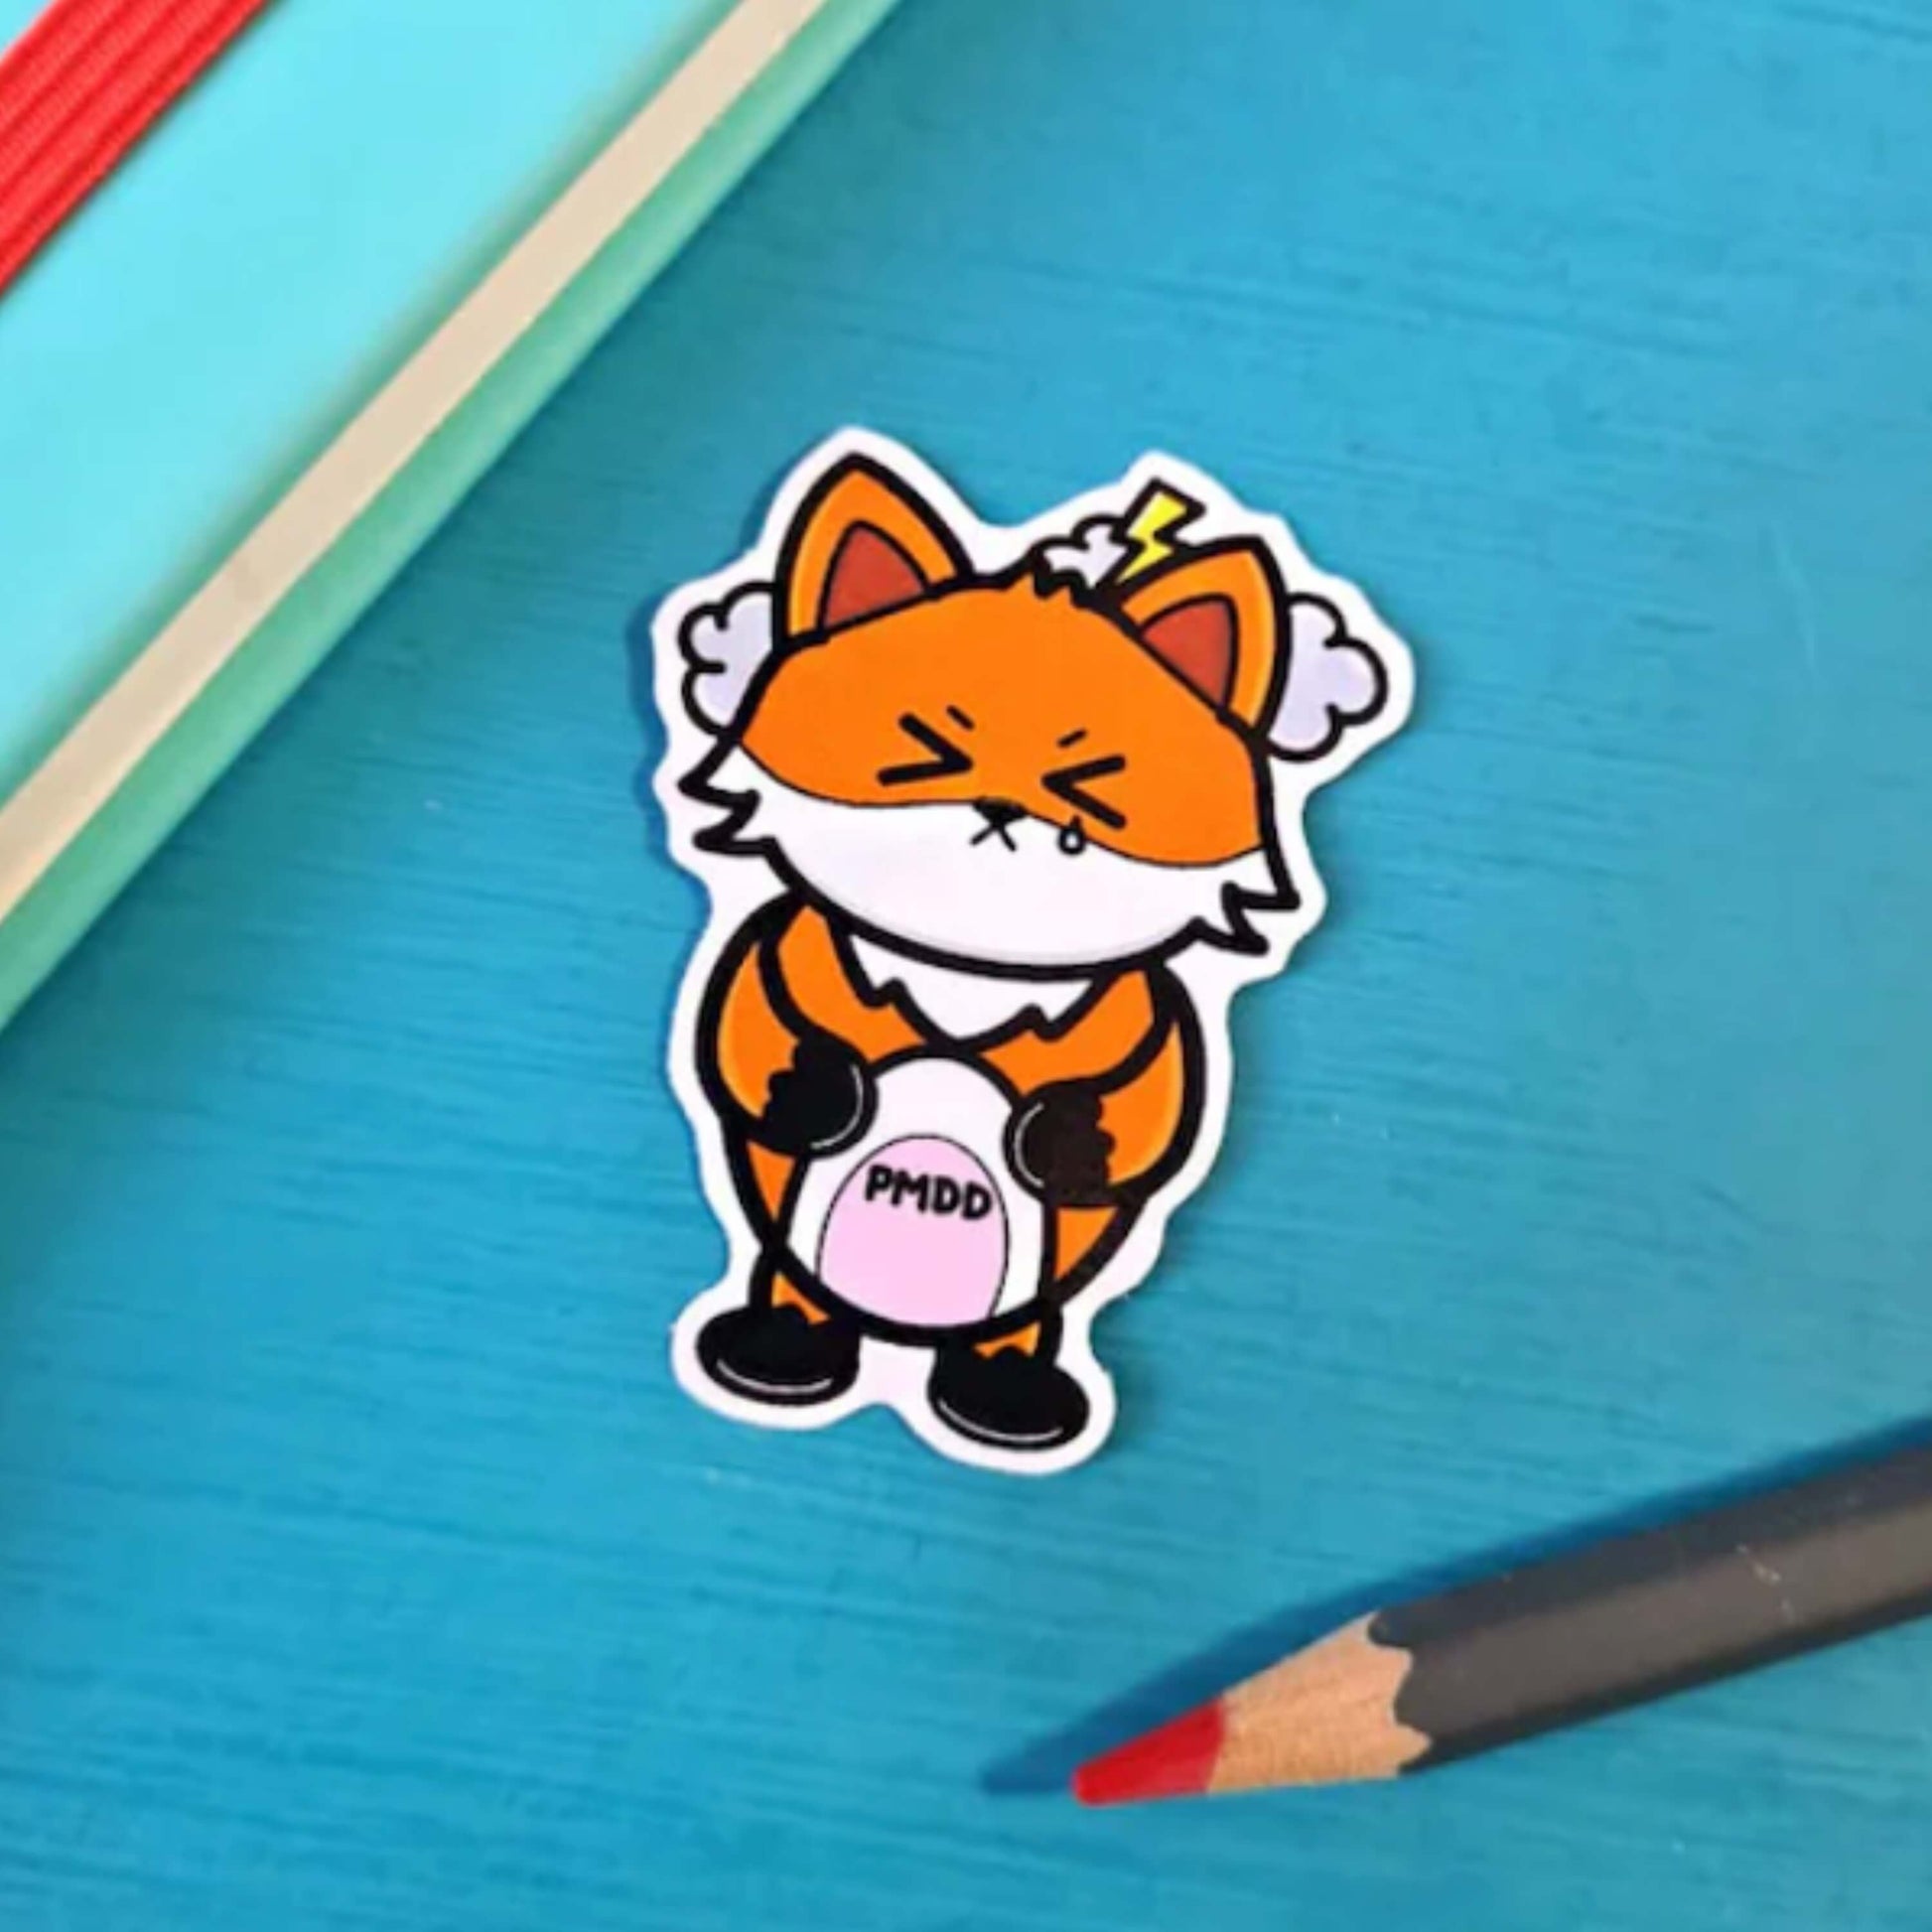 The PMDD Fox Sticker - Premenstrual Dysphoric Disorder PMDD on a blue background with a blue notebook and colouring pencil. The orange fox sticker has its eyes scrunched shut with storm clouds above its head, clutching its pink belly with black text reading 'PMDD'. The hand drawn design is raising awareness for Premenstrual Dysphoric Disorder.